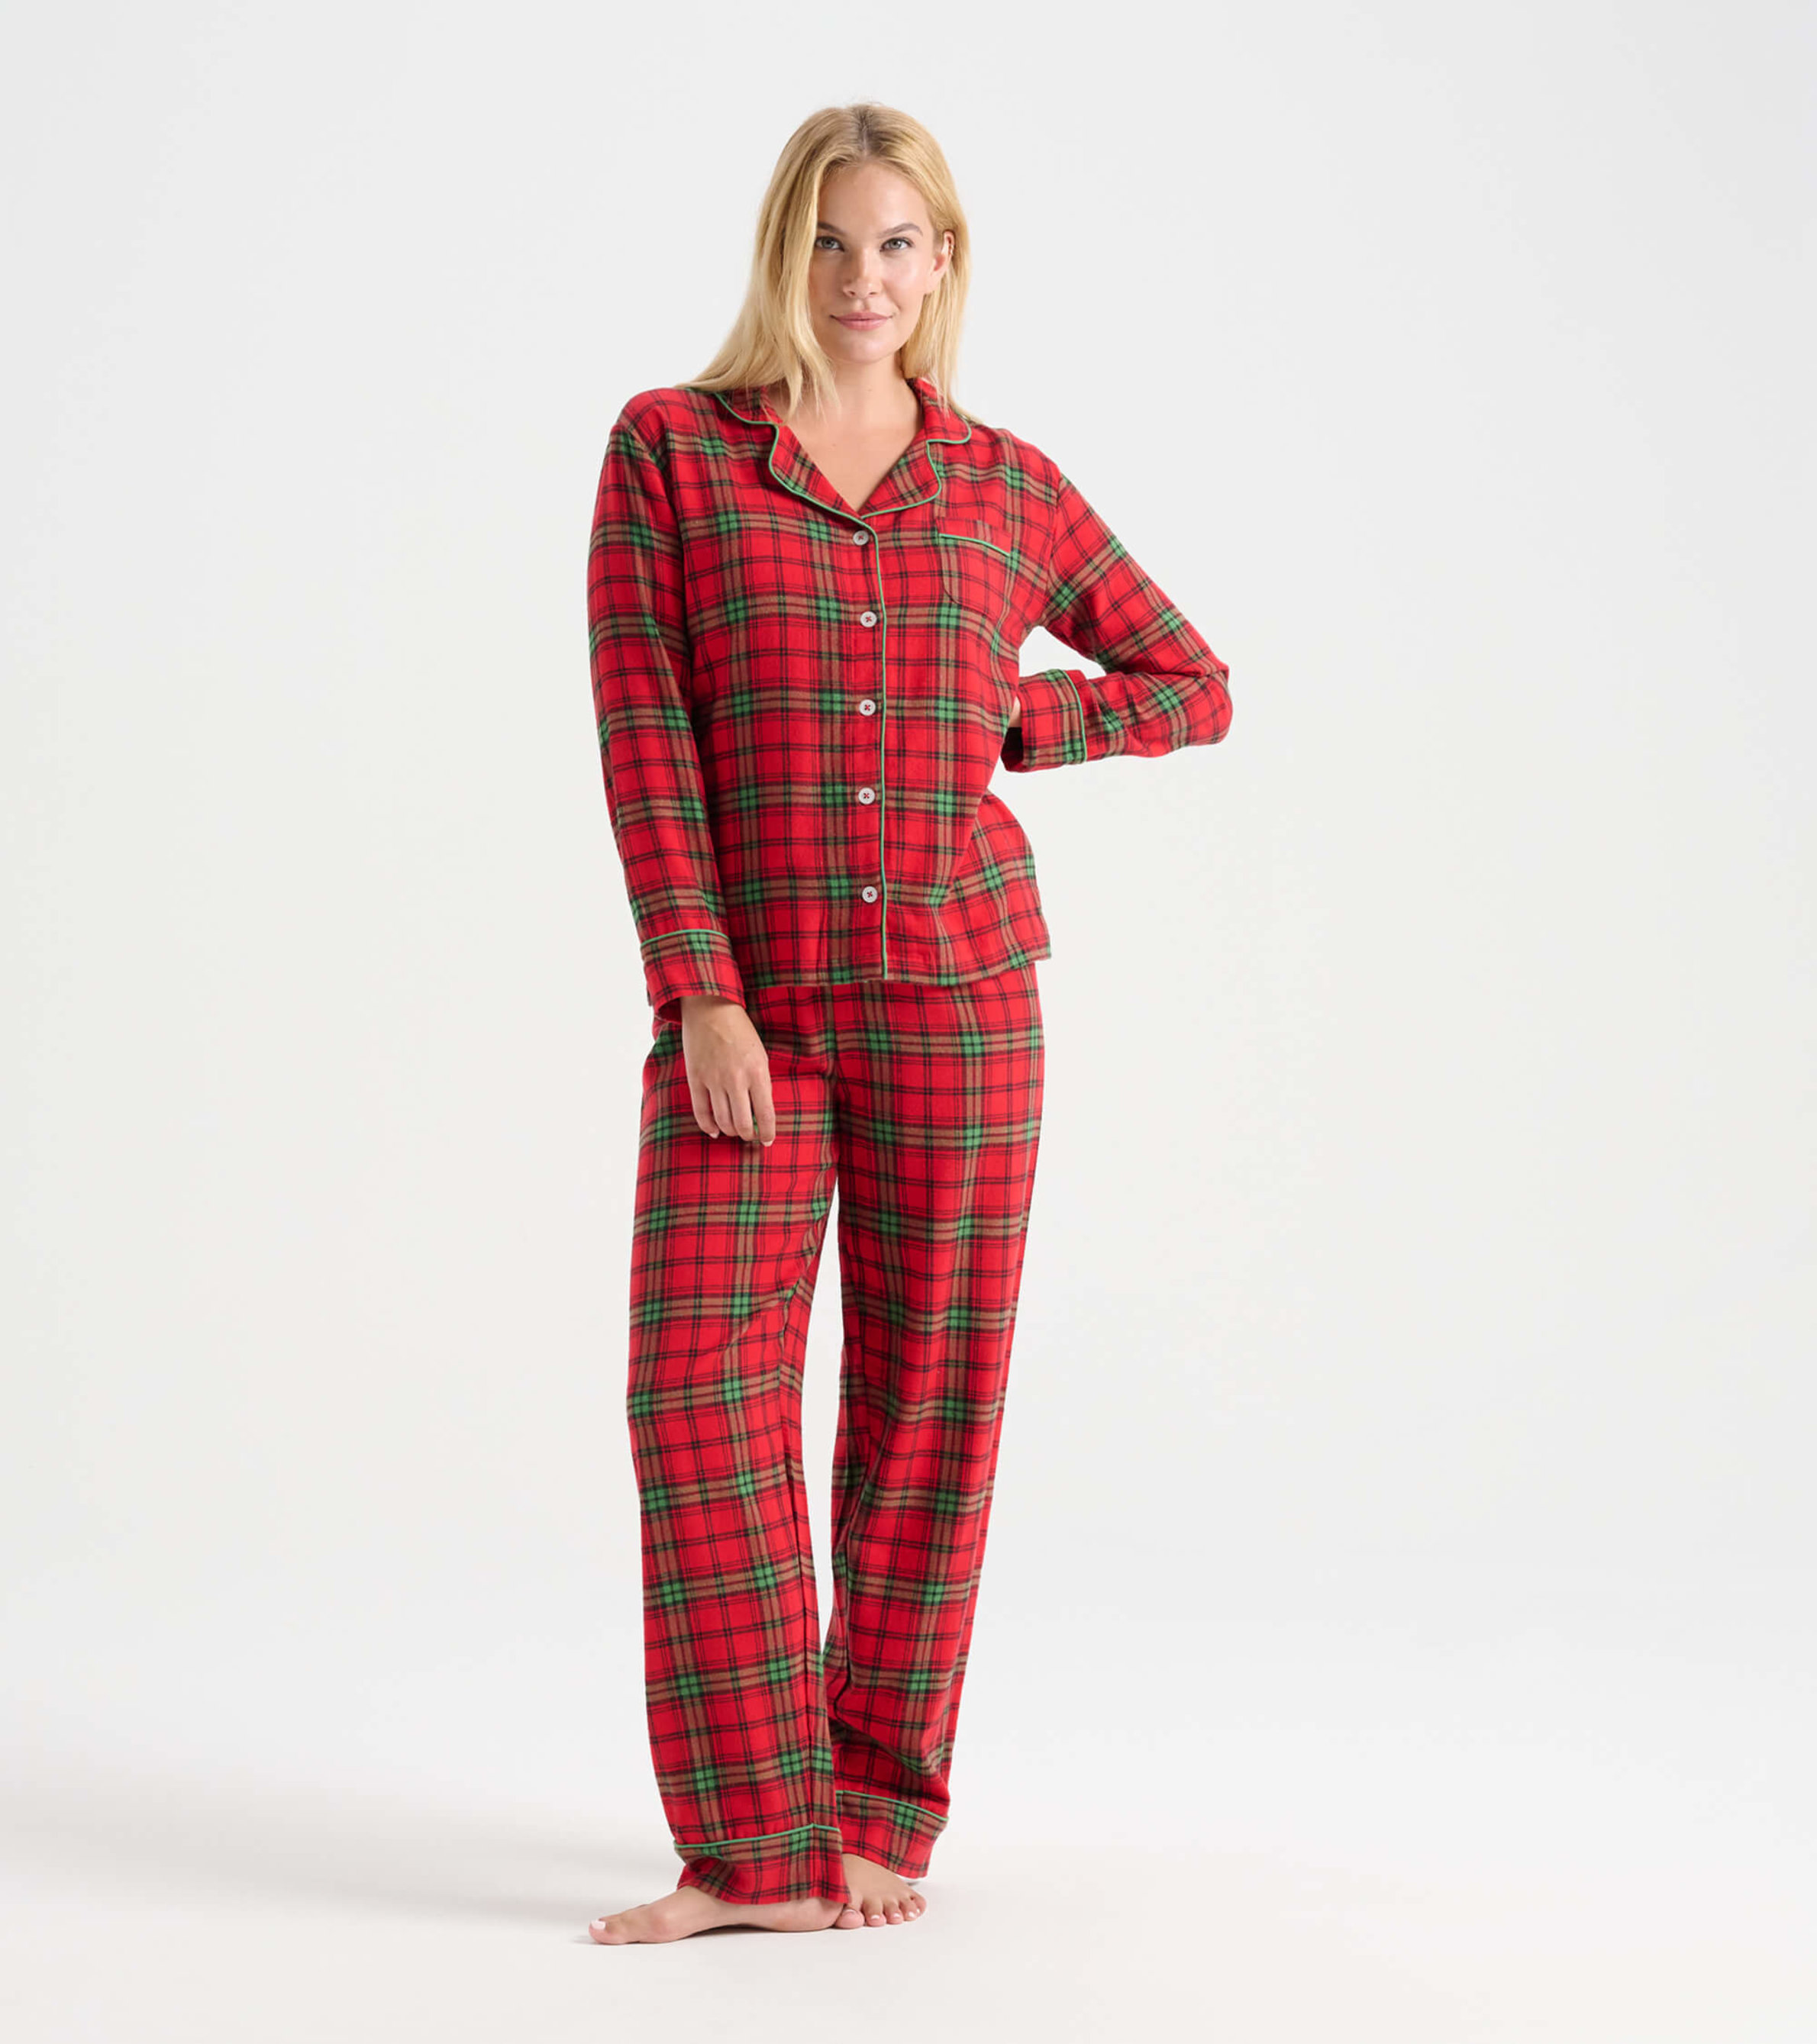 Holiday pajamas  Flannel pajama sets, Pants for women, Flannel